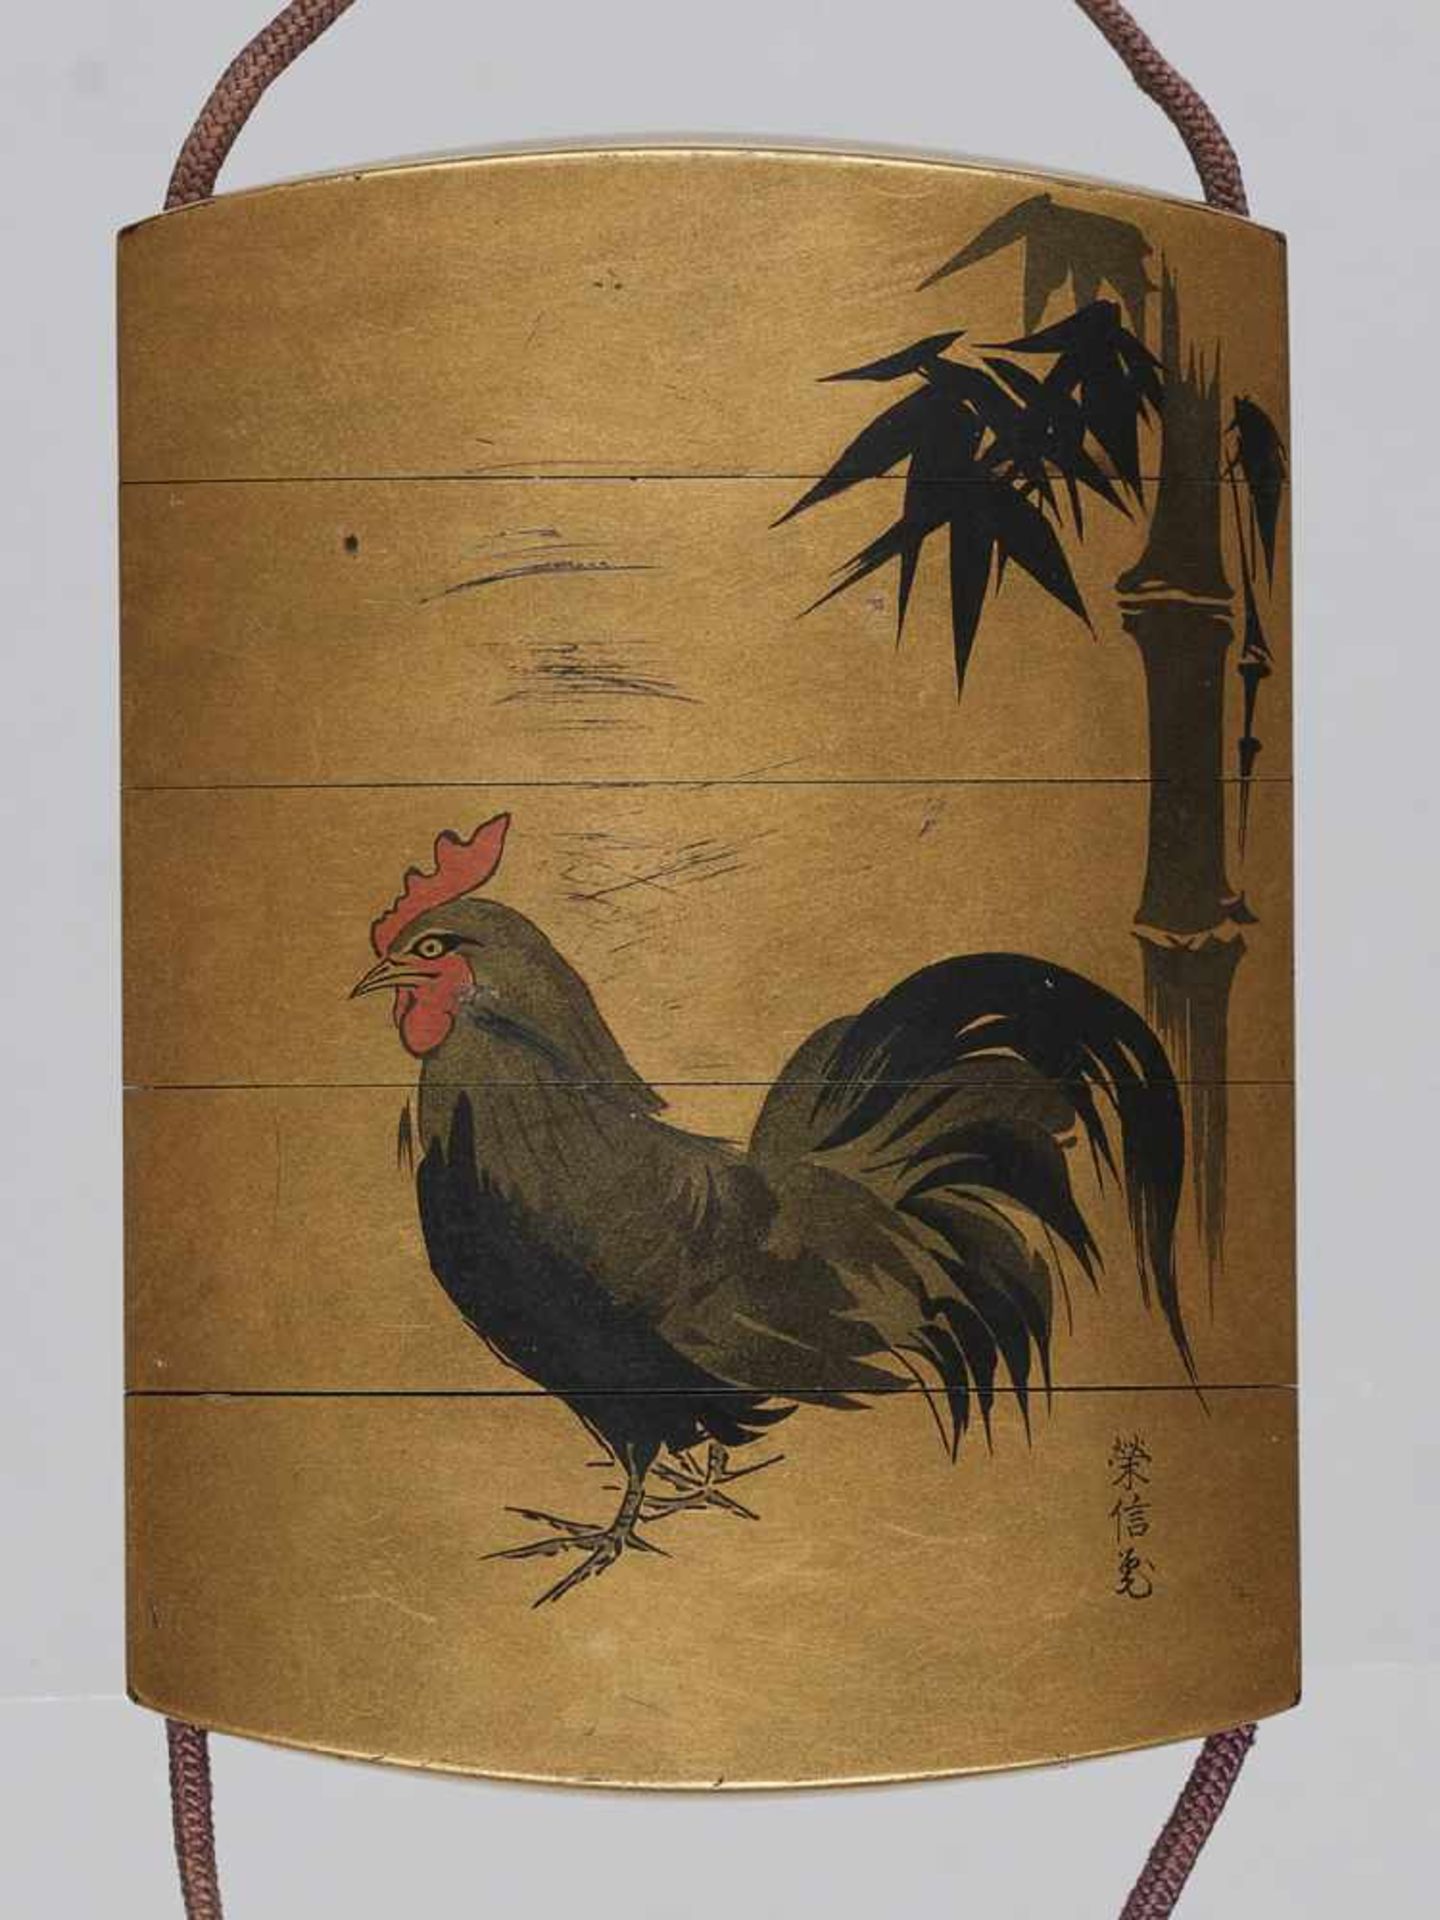 A FOUR-CASE LACQUER INRO WITH COCKEREL AND LACQUER MANJU NETSUKE - Image 3 of 5